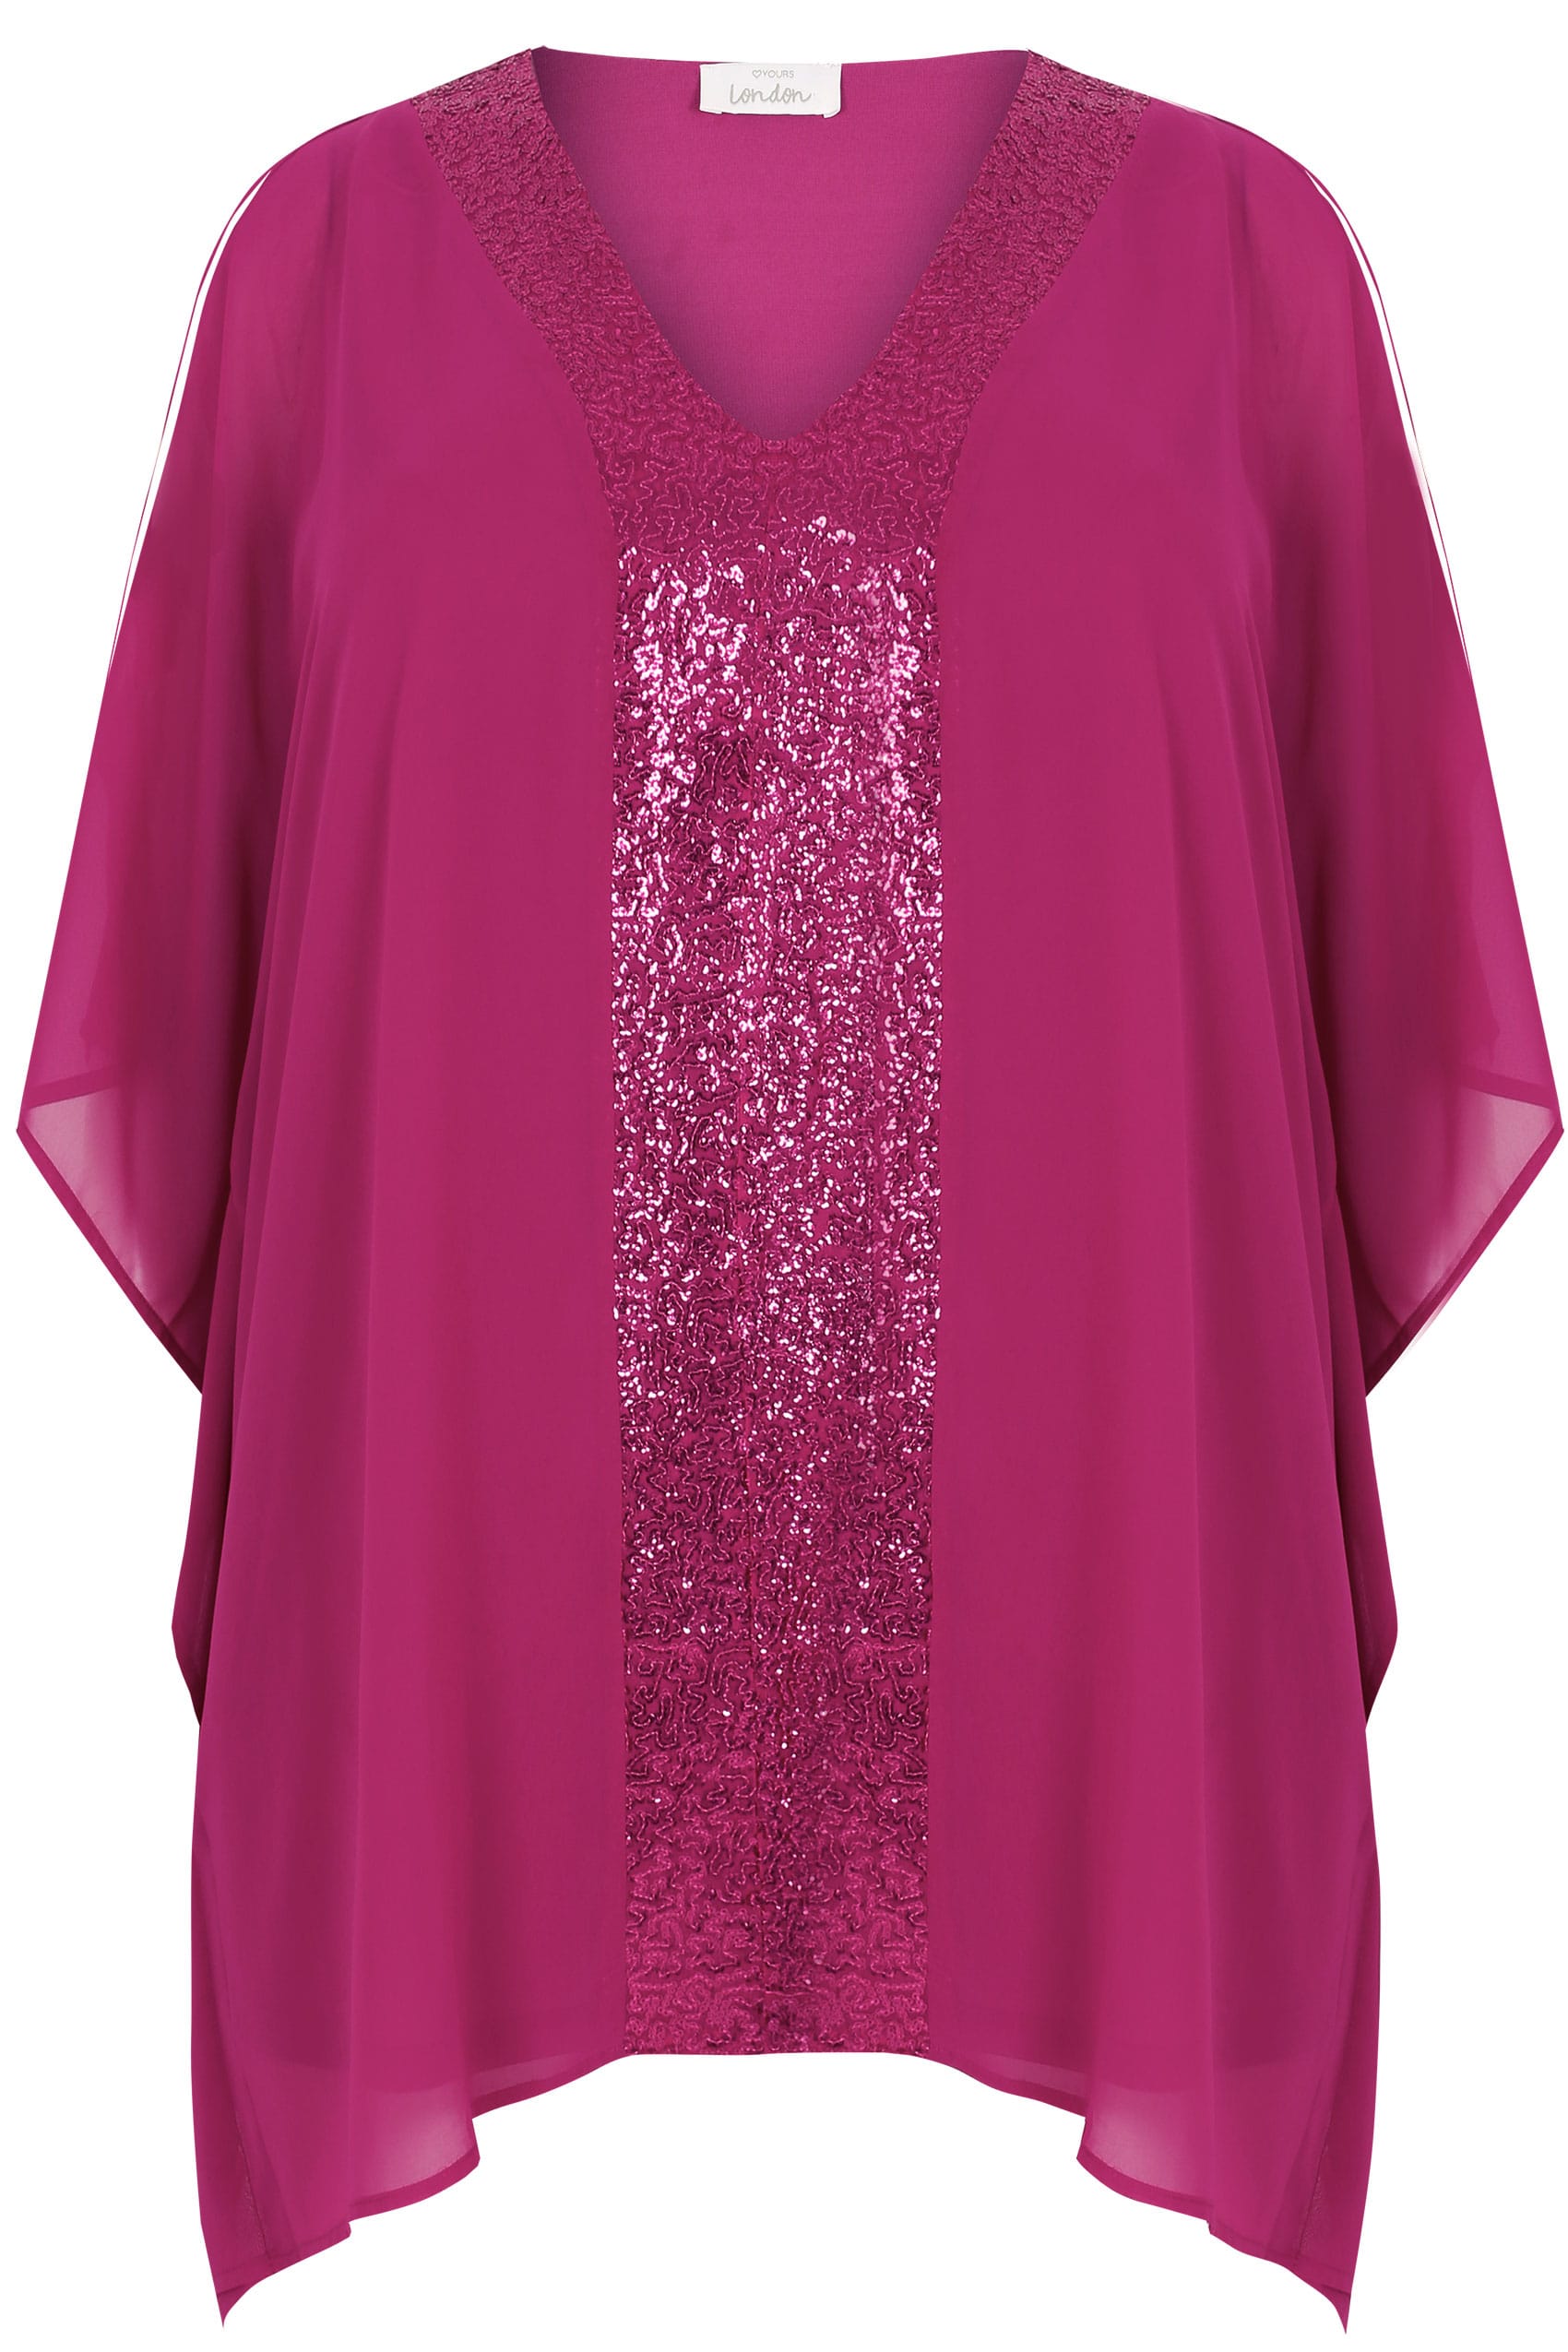 Fuchsia Pink Sequin V-Neck Blouse With Cold Shoulders, Plus size 16 to 32